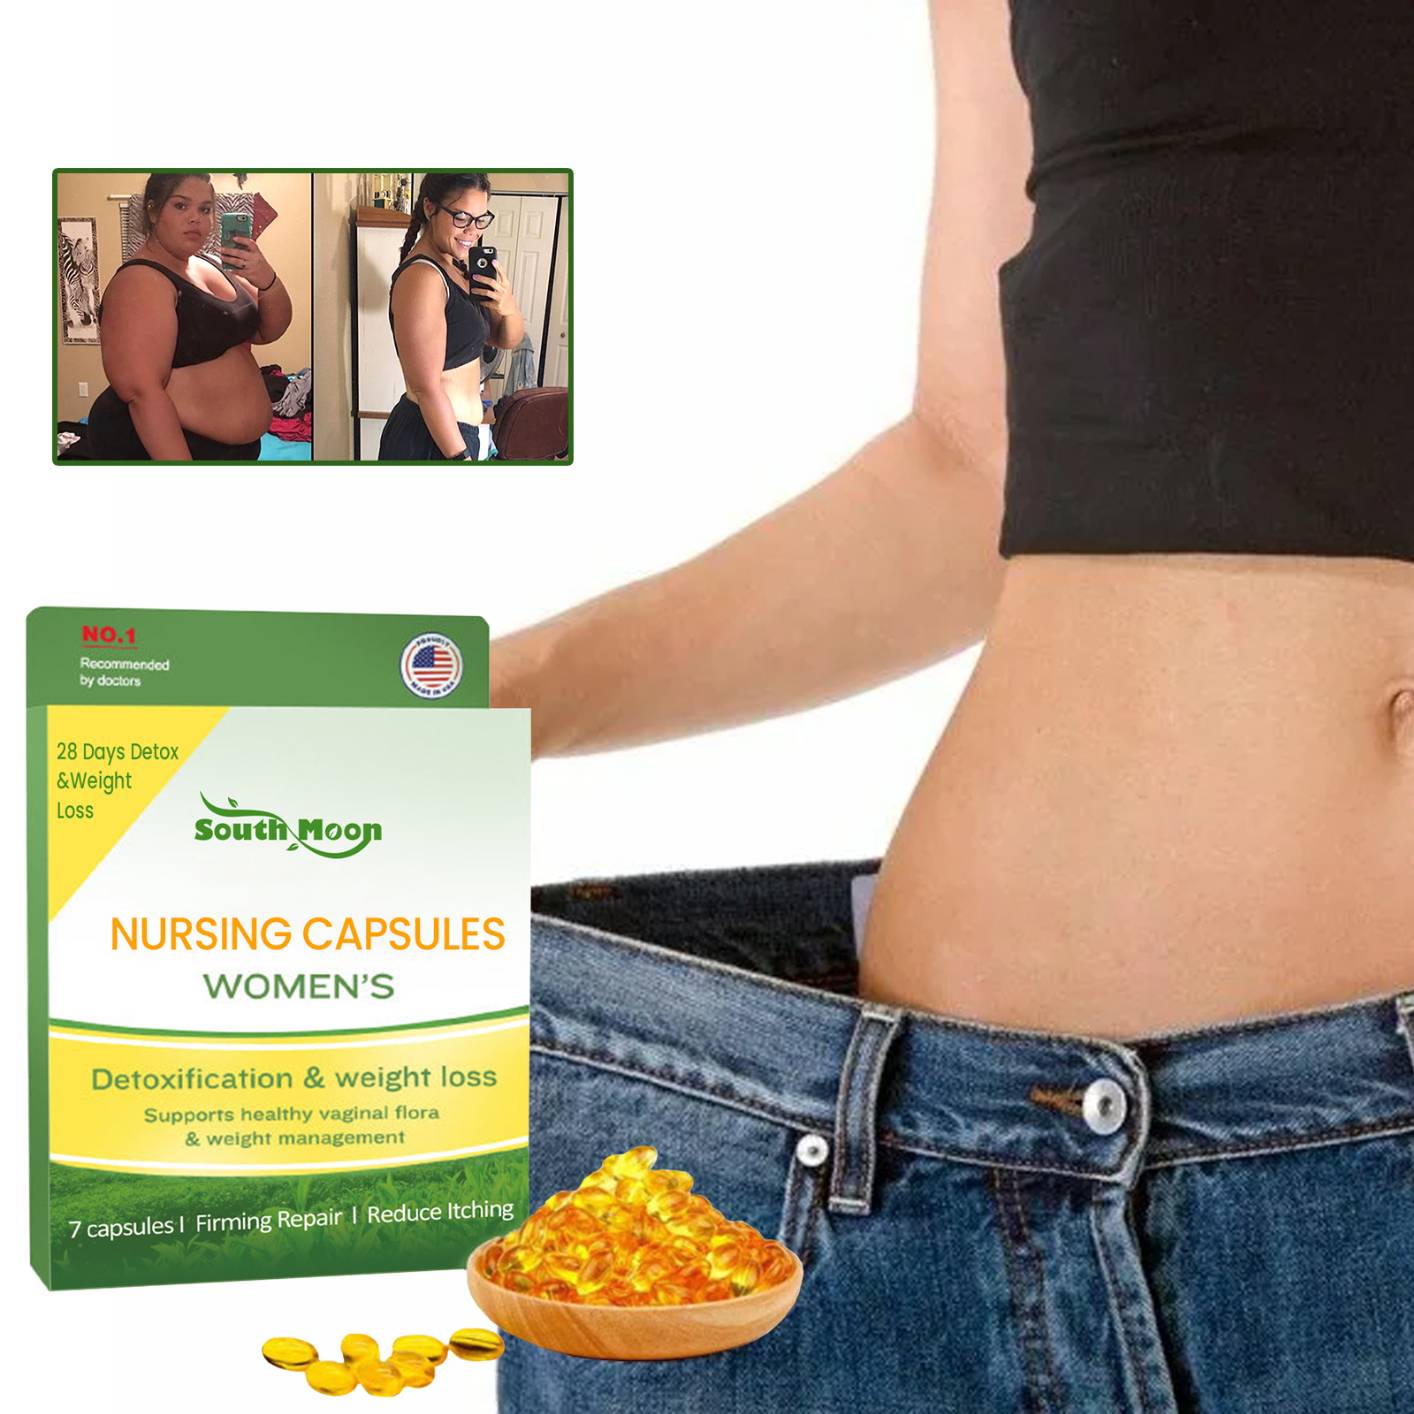 South Moon Detox Slimming Capsules Firming Abdomen Fat Burning Itching Stopper Cleansing Body Toxins Anti Cellulite Body Shaping Capsule